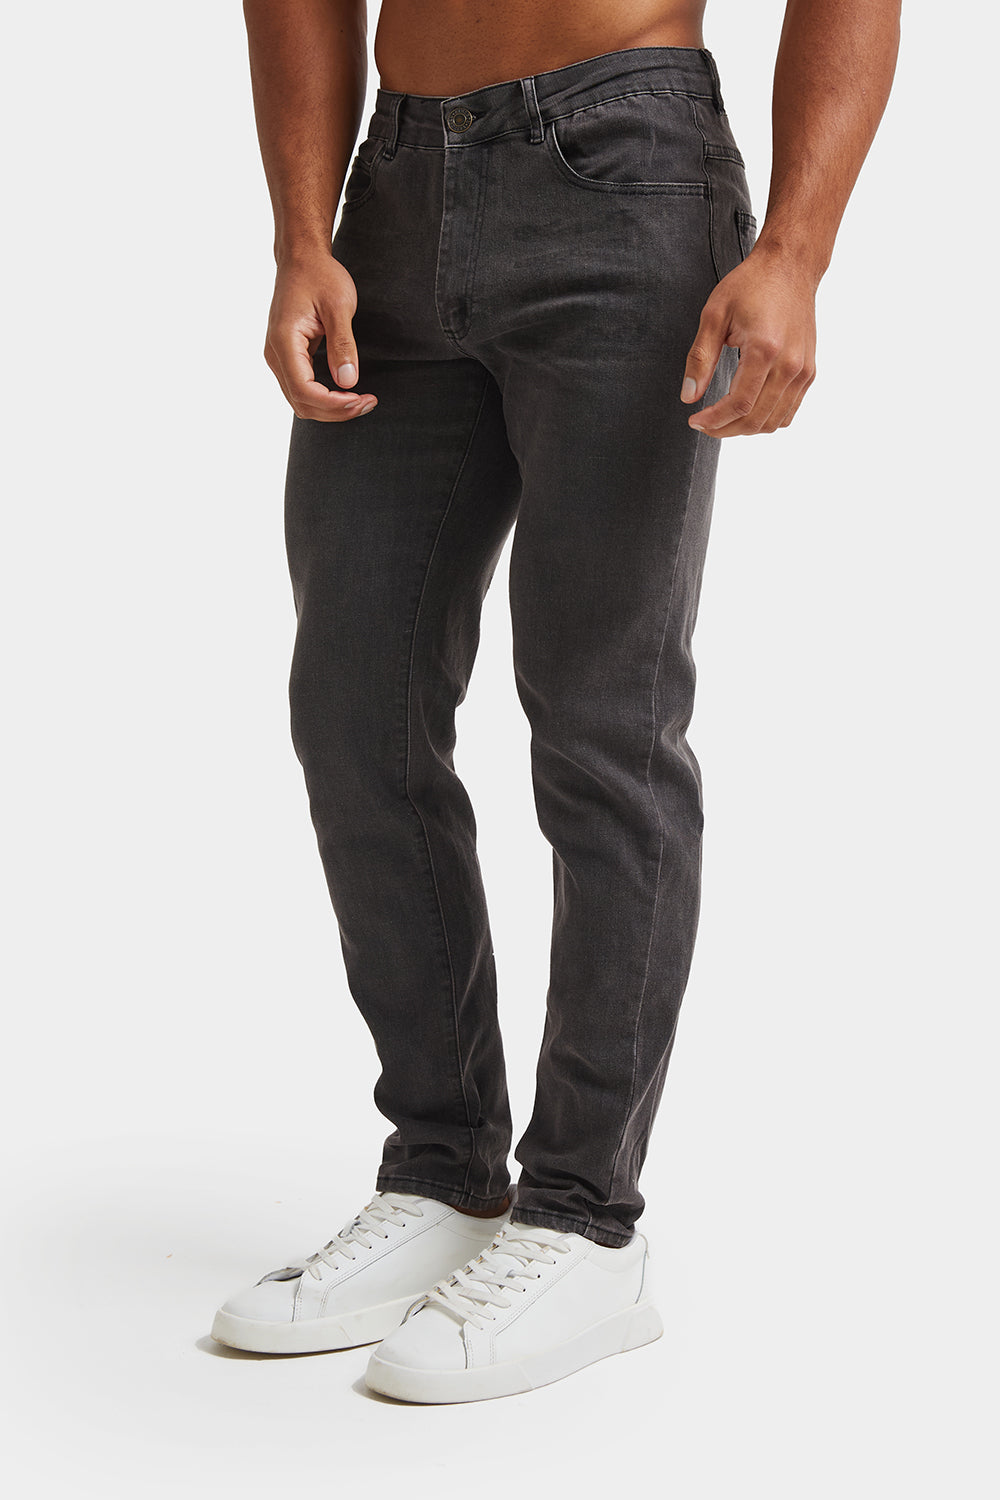 Jeans Fit in Athletic TAILORED Grey - ATHLETE - USA Dark